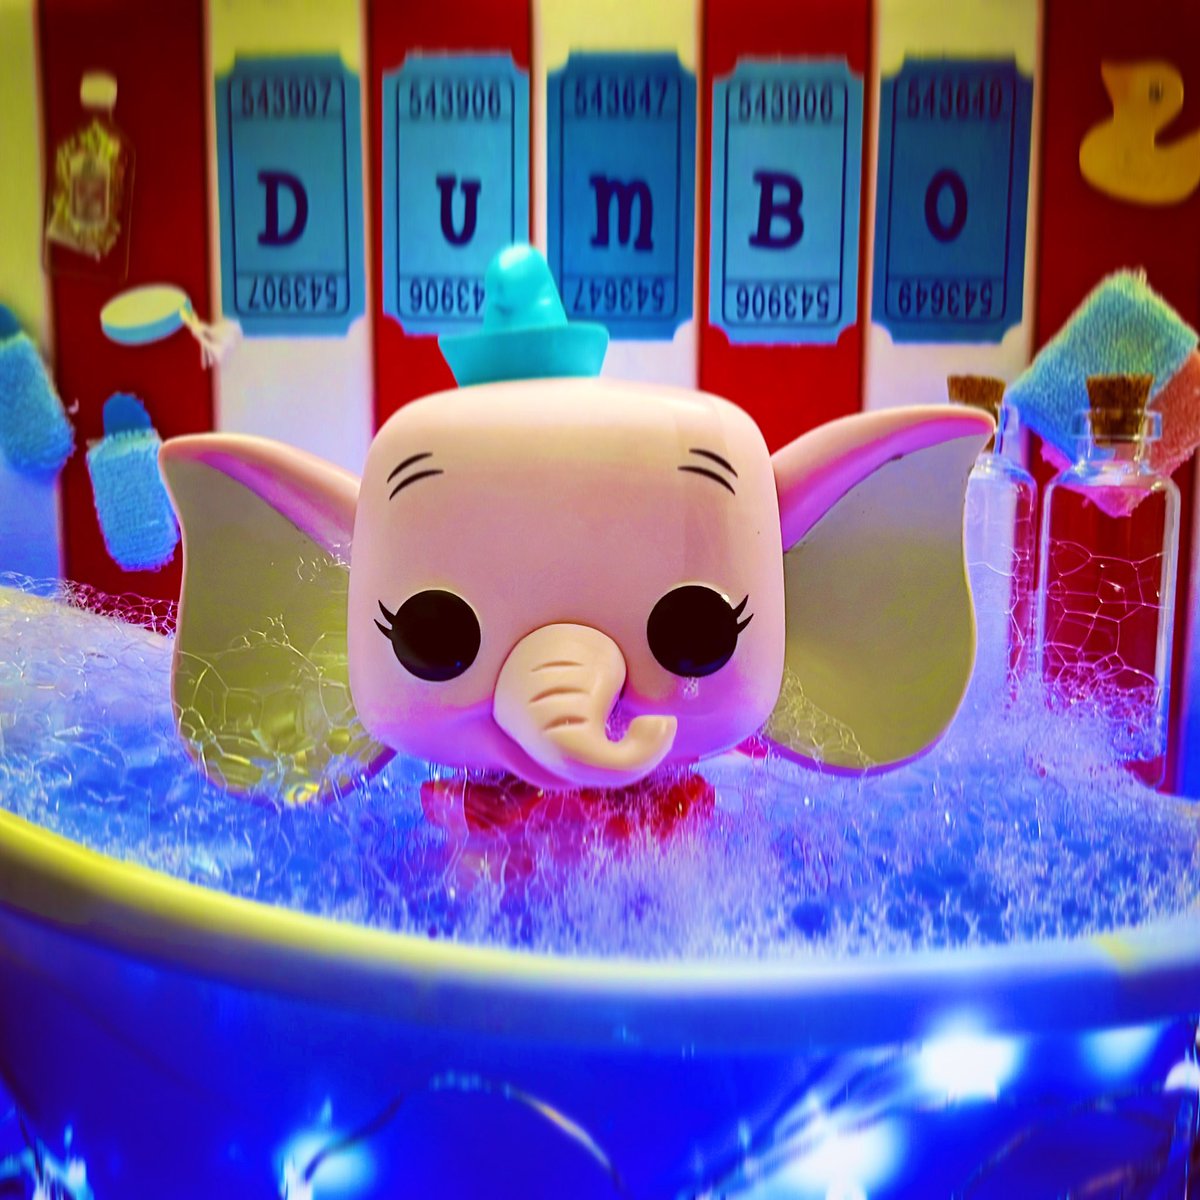 Ok #FunkoFamily let's have fun...

With all the photo challenges we did what was your Top 3 Photos you loved the most that you did? 

I'll go First...

Jordan, Freddy Fresh, Dumbo

#FunkoPhotoADayChallenge 
#Funko #FunkoPop #FunkoFunatic